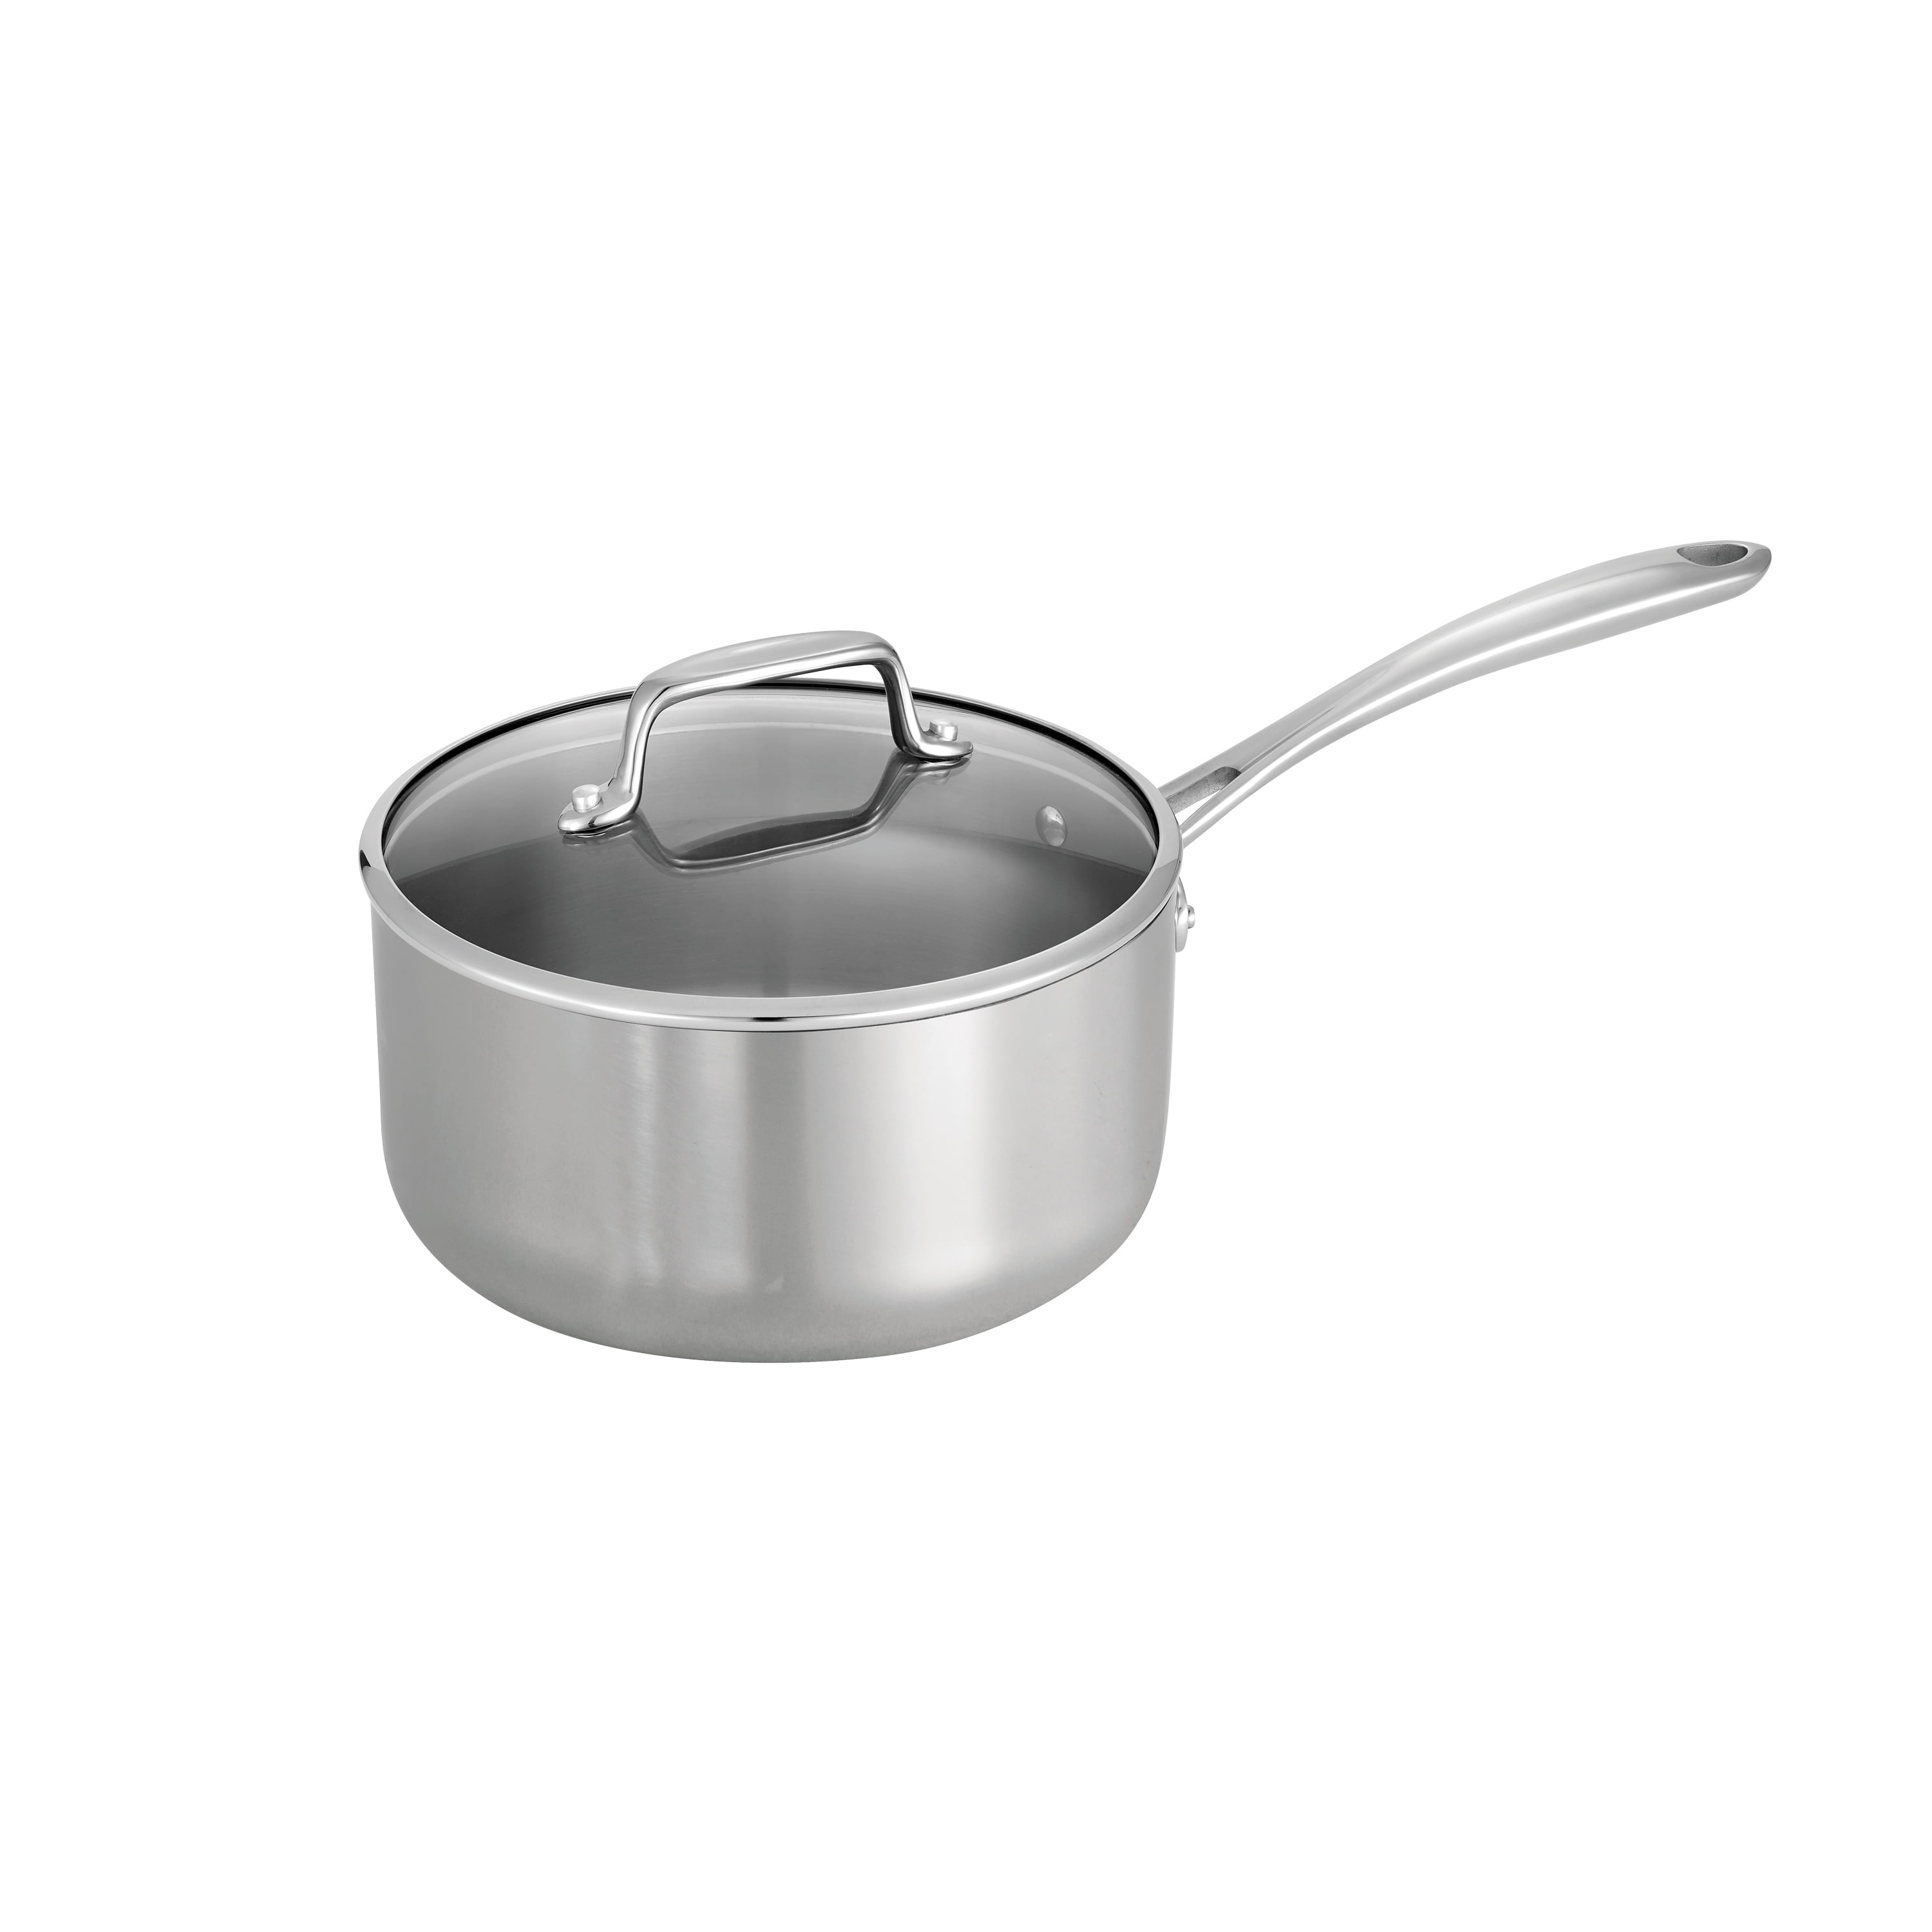 SLOTTET Tri-Ply Whole-Clad Stainless Steel Sauce Pan with Pour Spout,1.5  Quart Small Multipurpose Pasta Pot with Strainer Glass Lid, Saucepan for